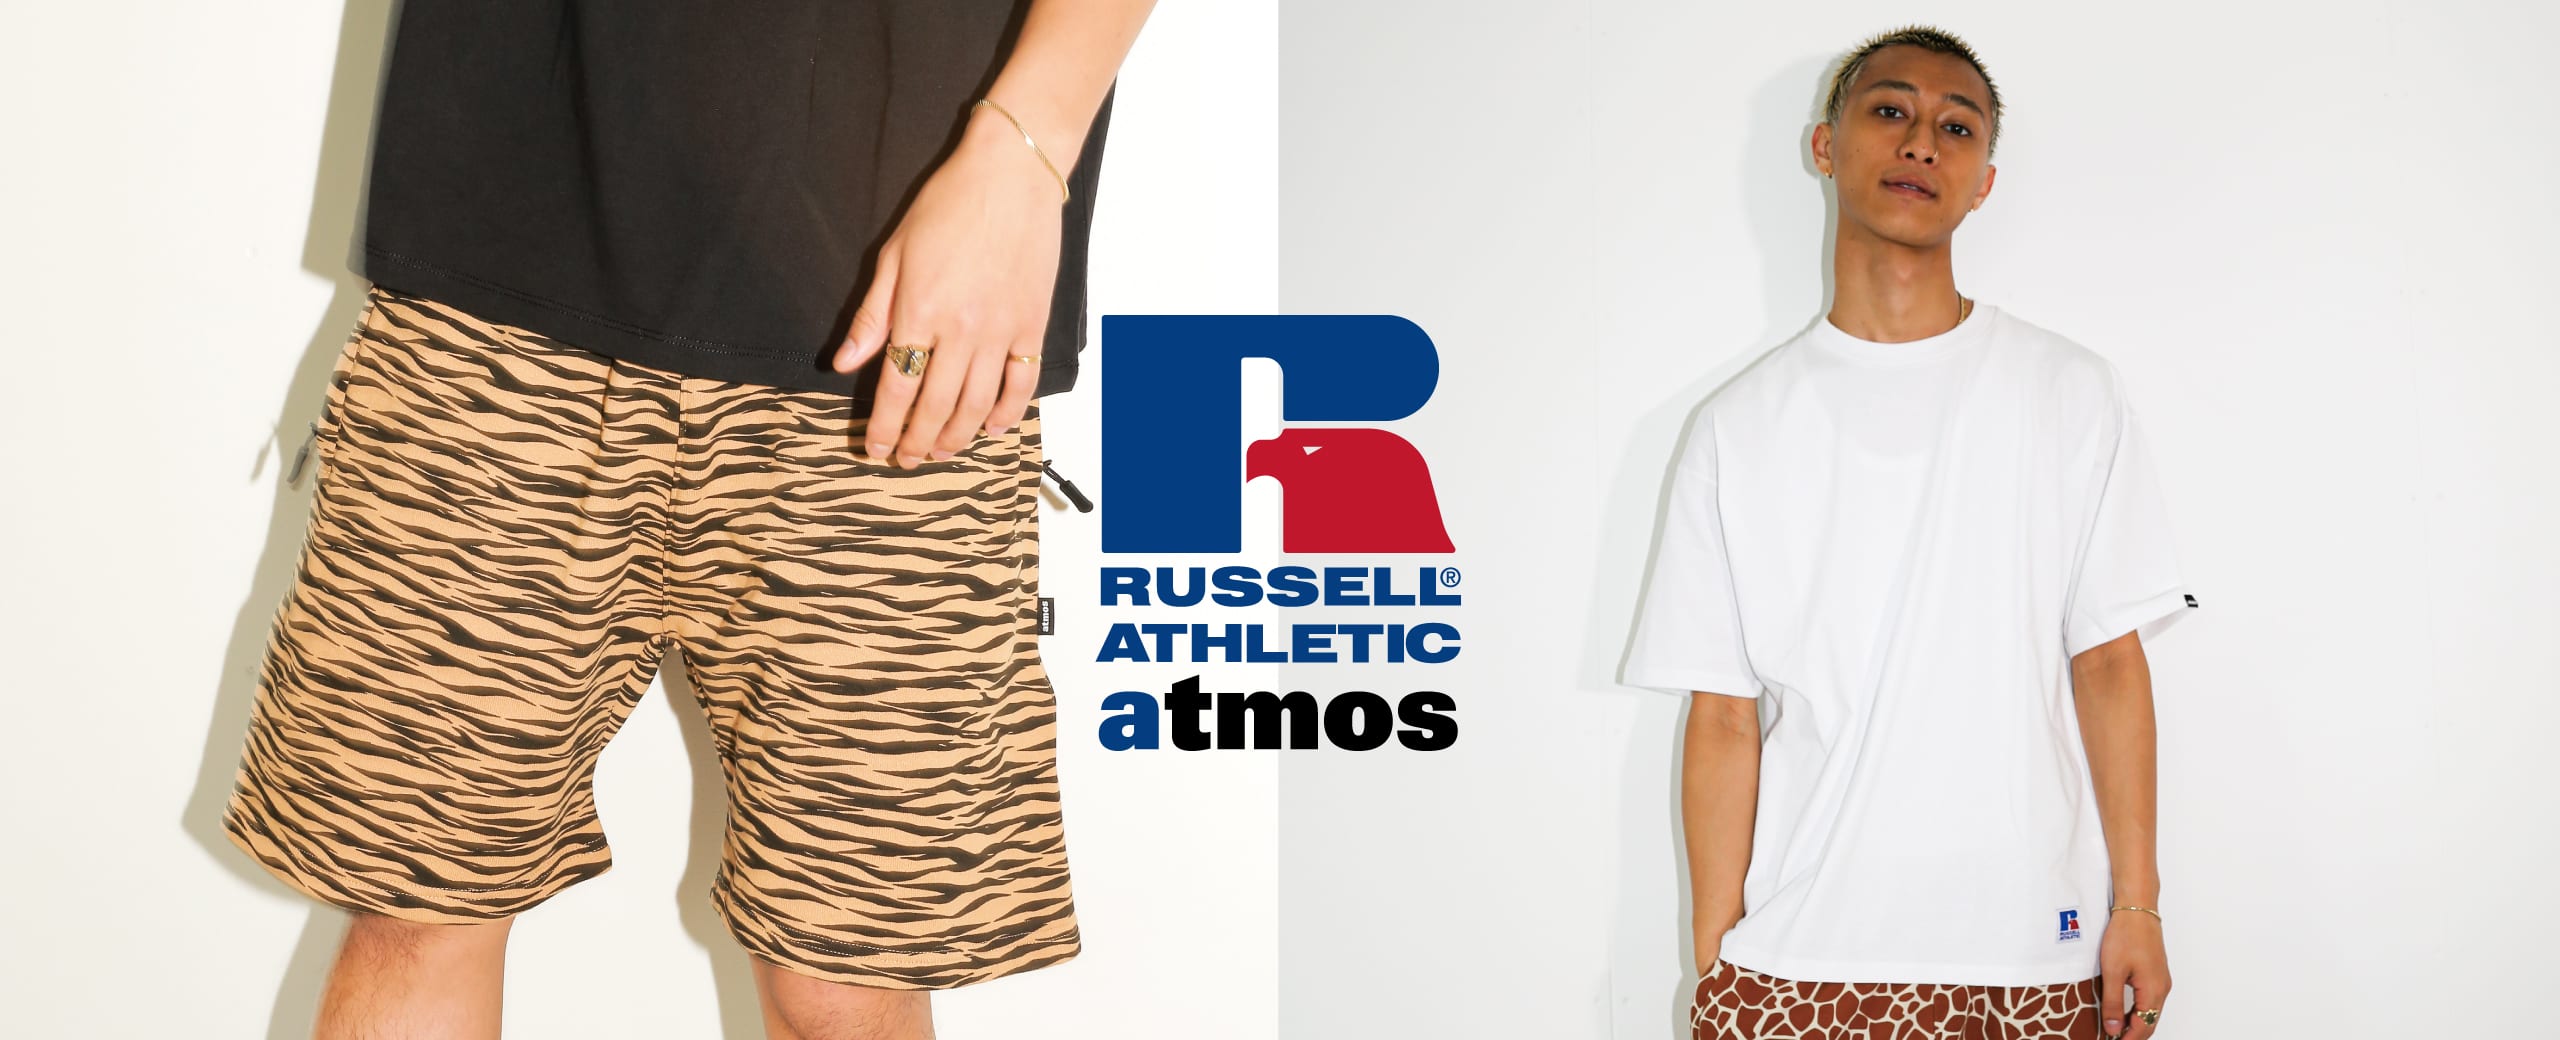 "atmos | RUSSELL ATHLETIC"